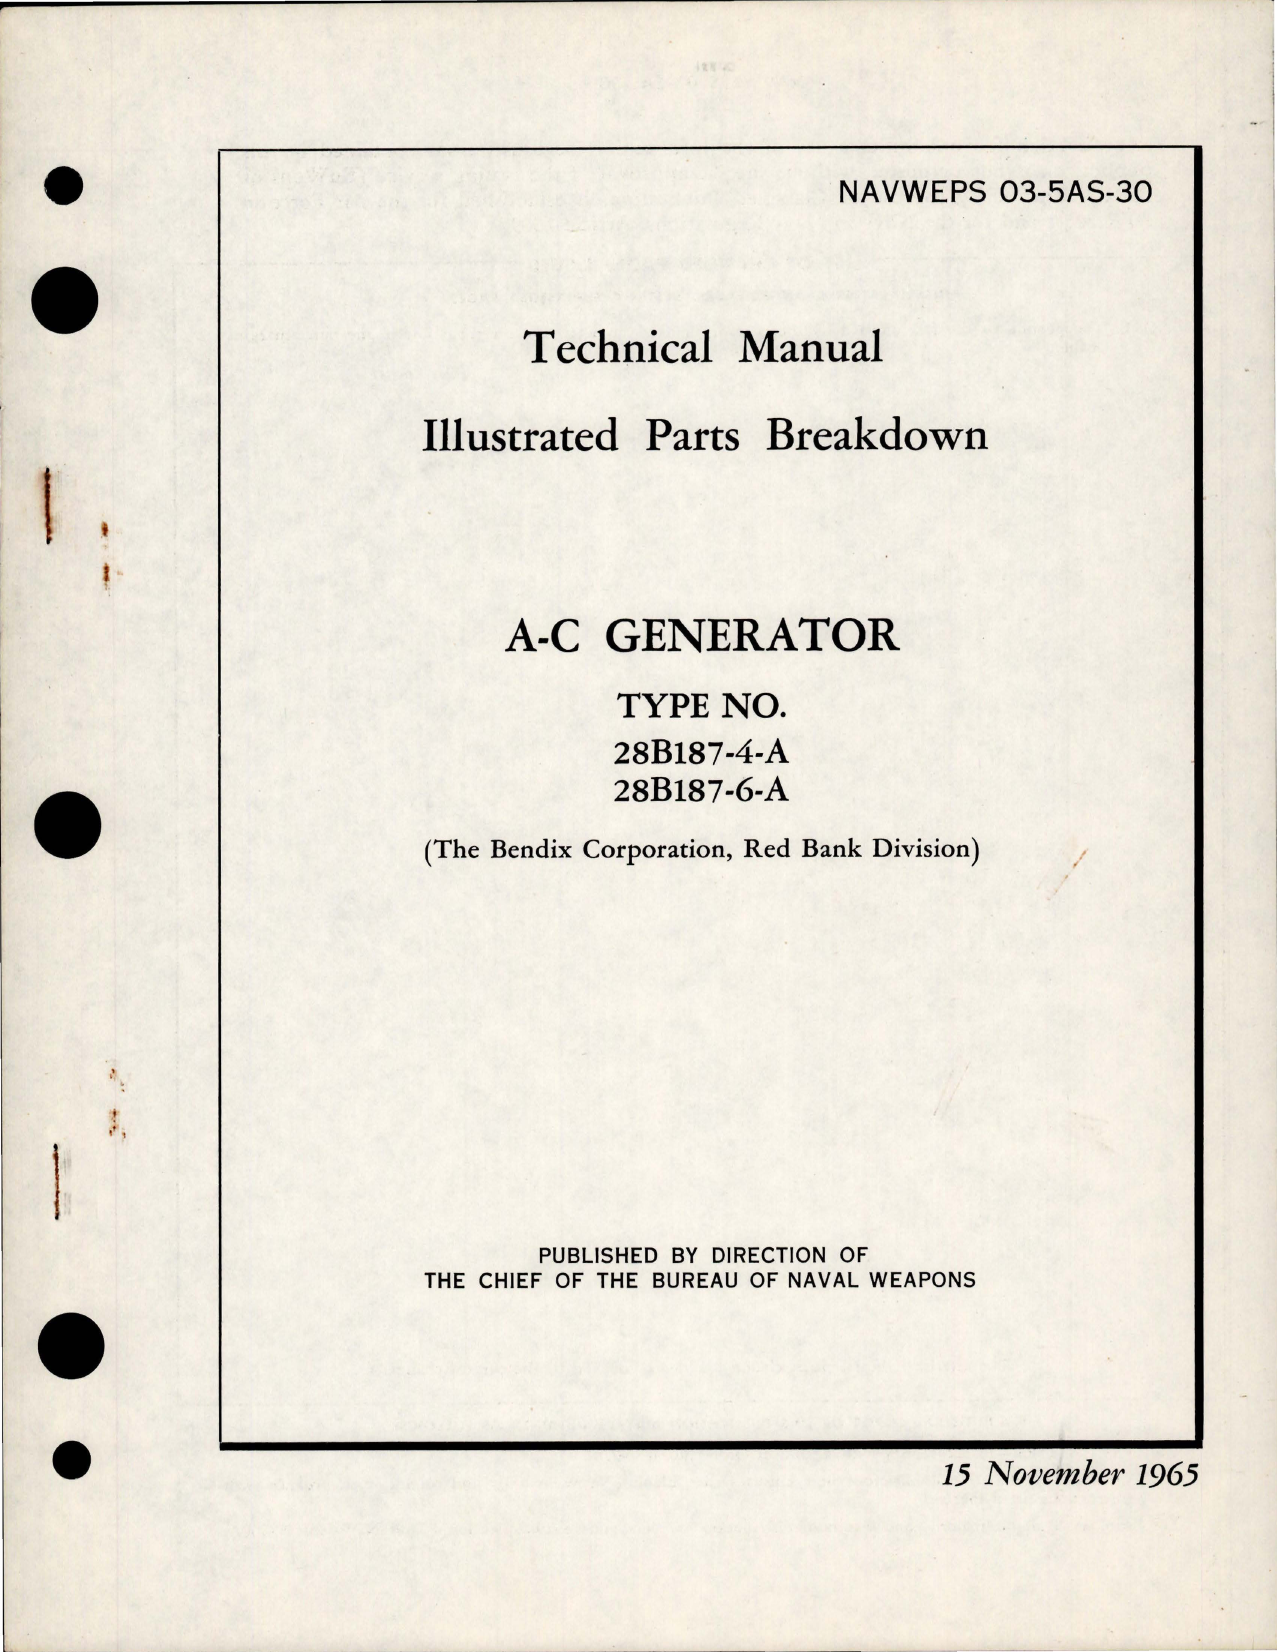 Sample page 1 from AirCorps Library document: Illustrated Parts Breakdown for AC Generator - Type 28B187-4-A, 28B187-6-A 